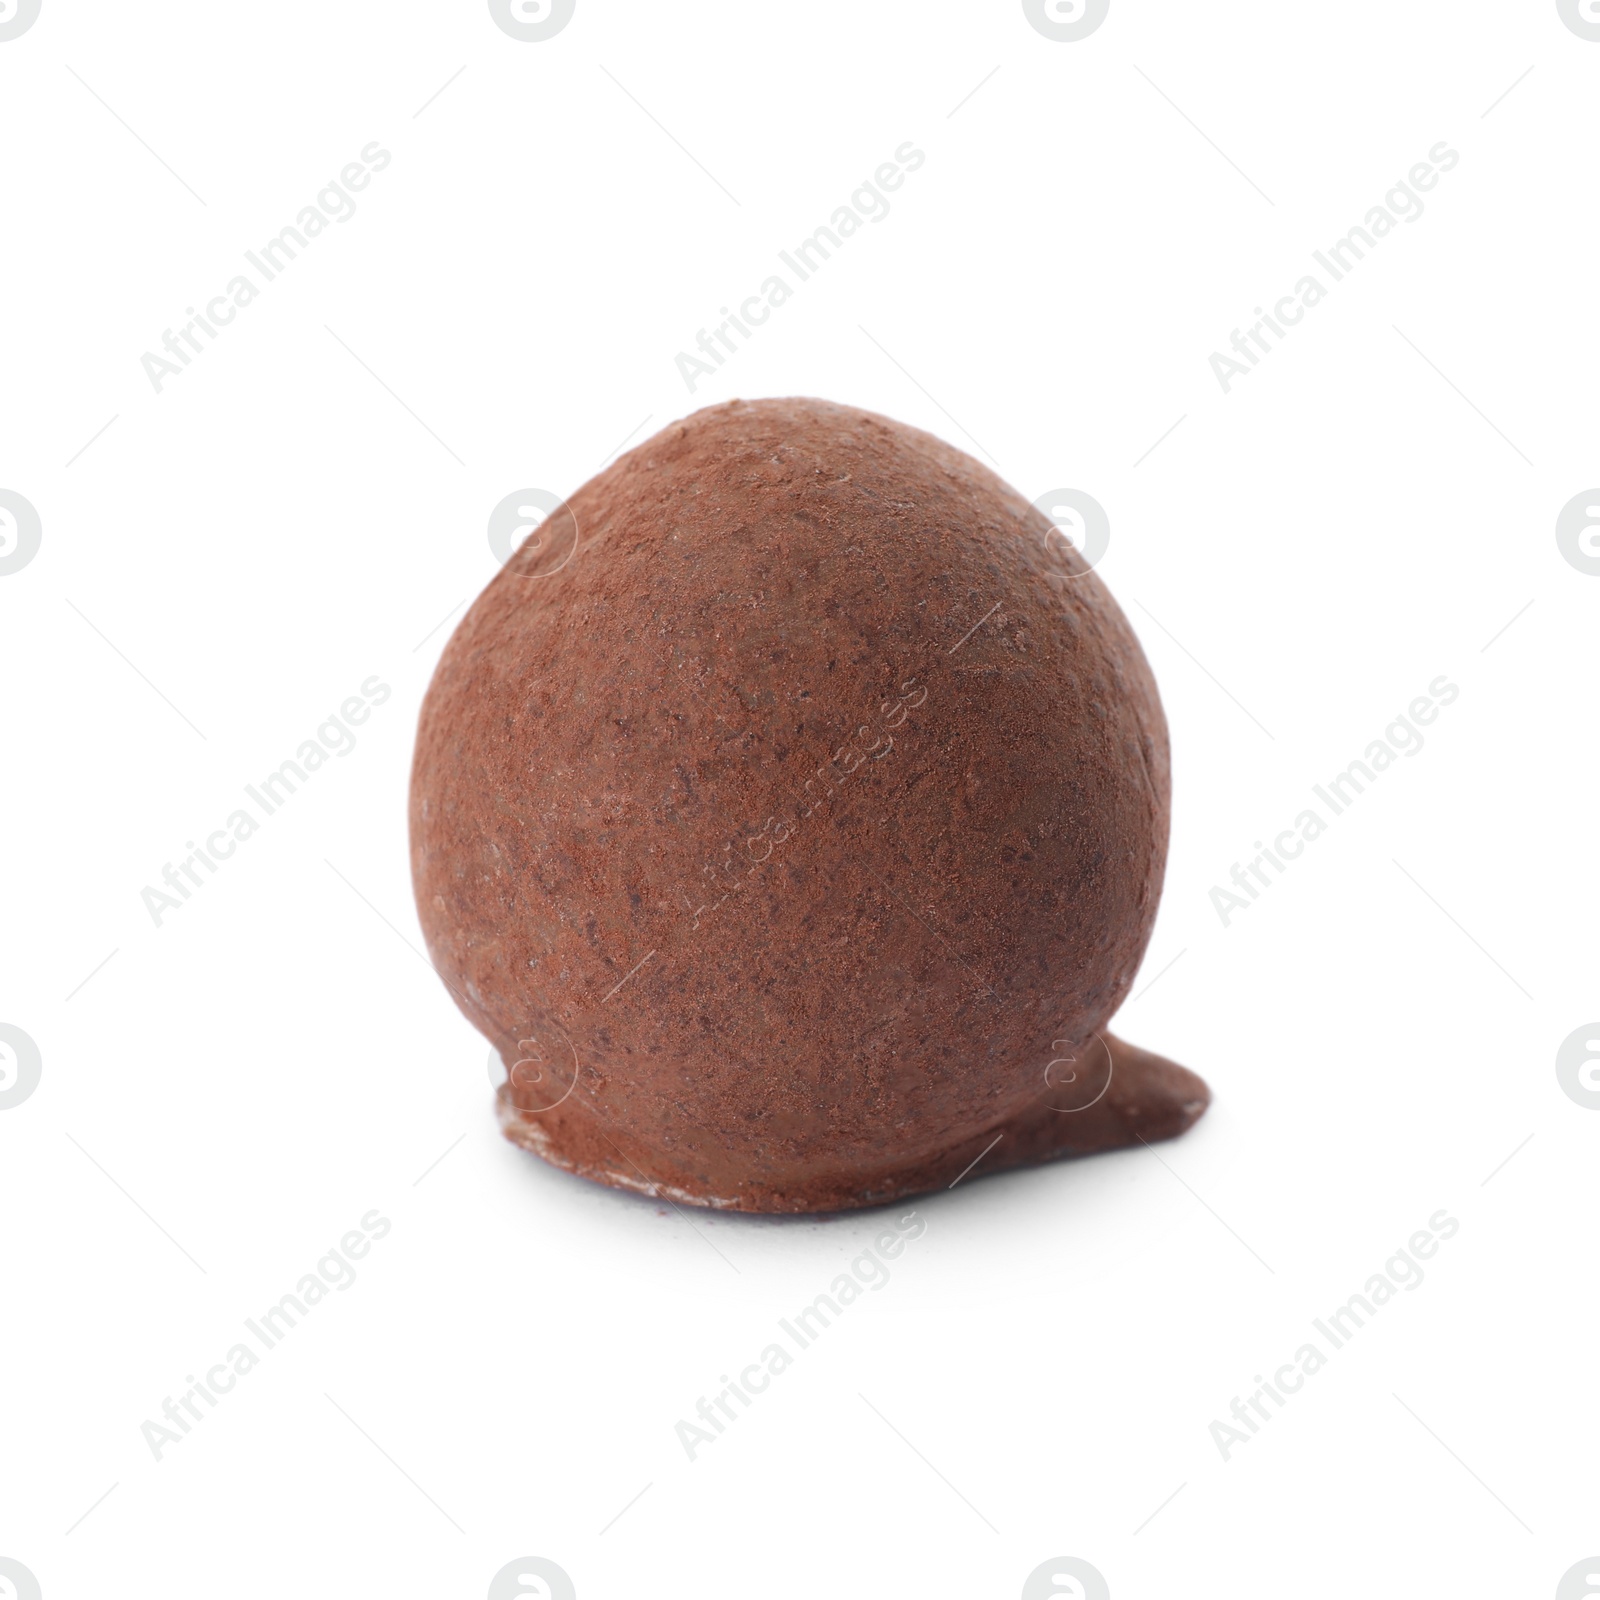 Photo of Delicious chocolate truffle candy isolated on white